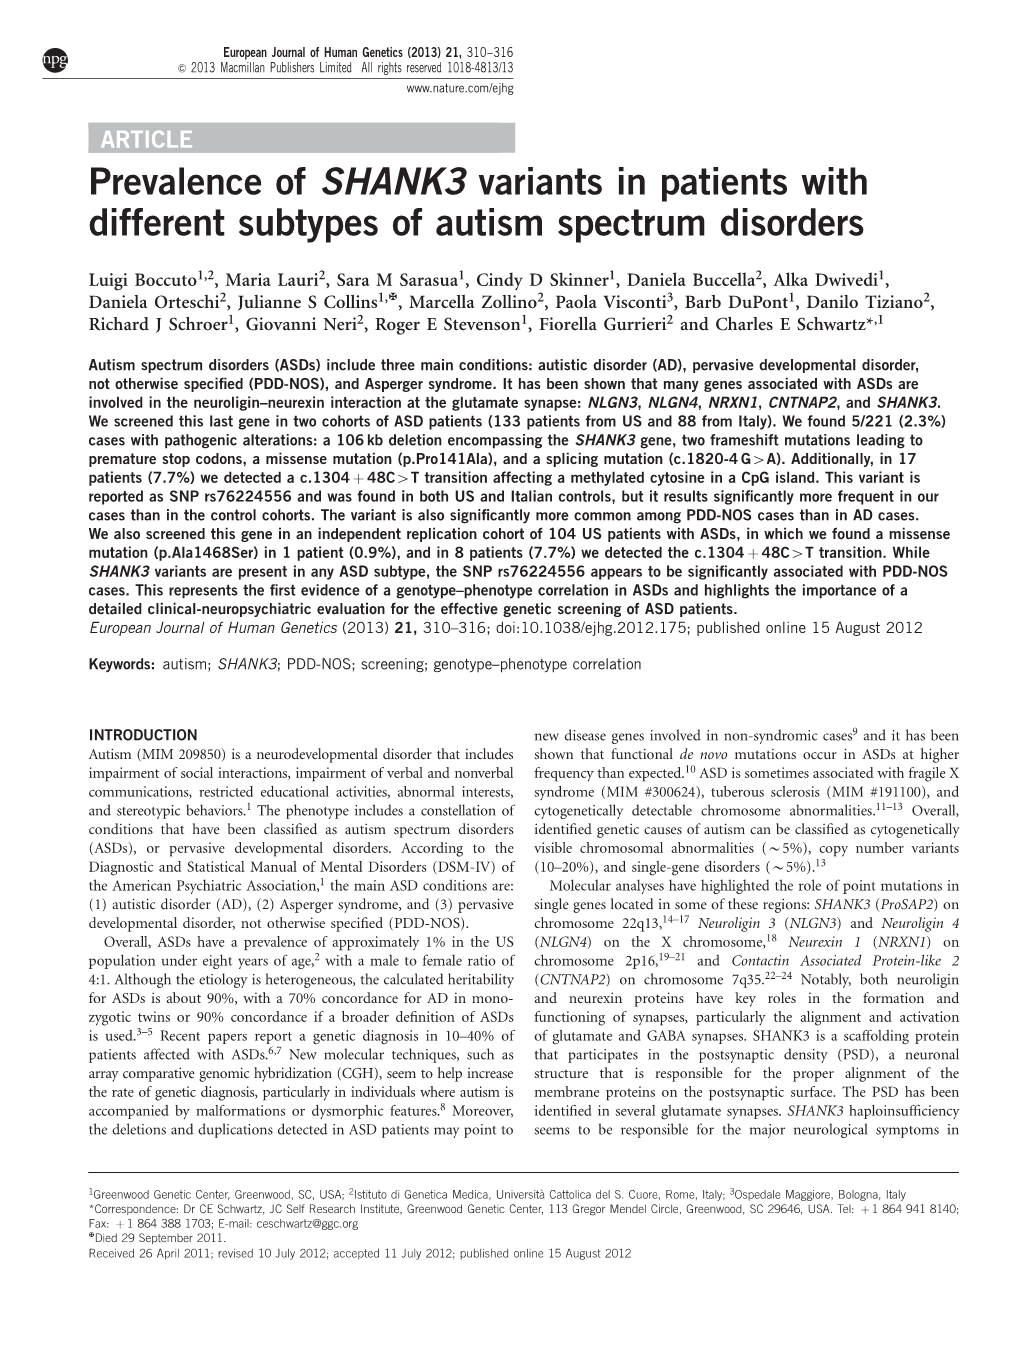 Prevalence of SHANK3 Variants in Patients with Different Subtypes of Autism Spectrum Disorders